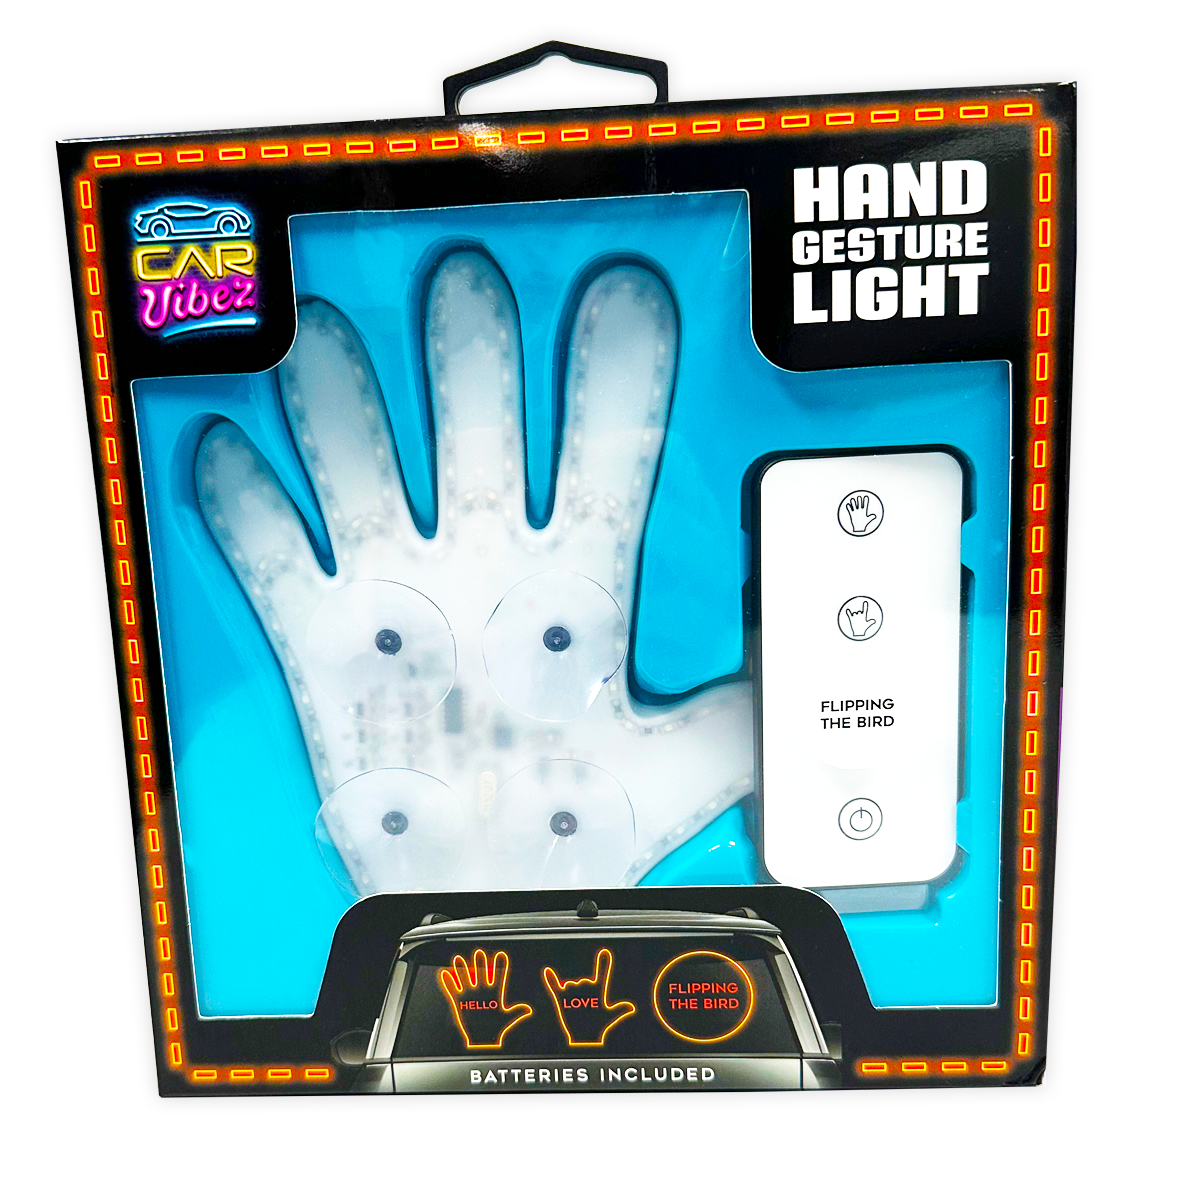 ITEM NUMBER 024454 HAND GESTURE LIGHT 6 PIECES PER DISPLAY – Novelty  Closeout